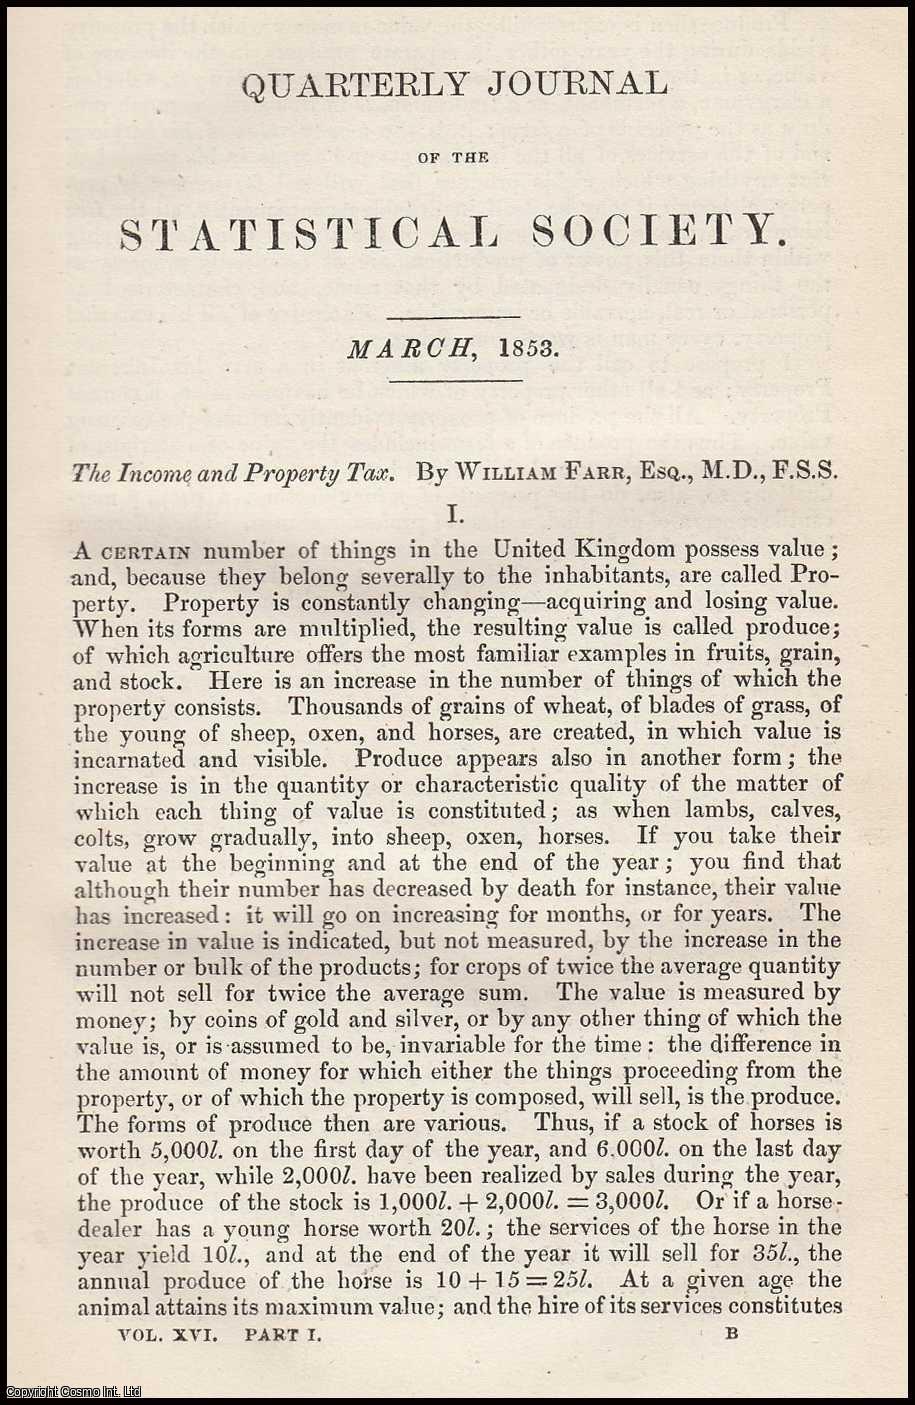 Farr, William. - The Income and Property Tax: On the Equitable Taxation of Property. A rare original article from the Journal of the Royal Statistical Society of London, 1853.